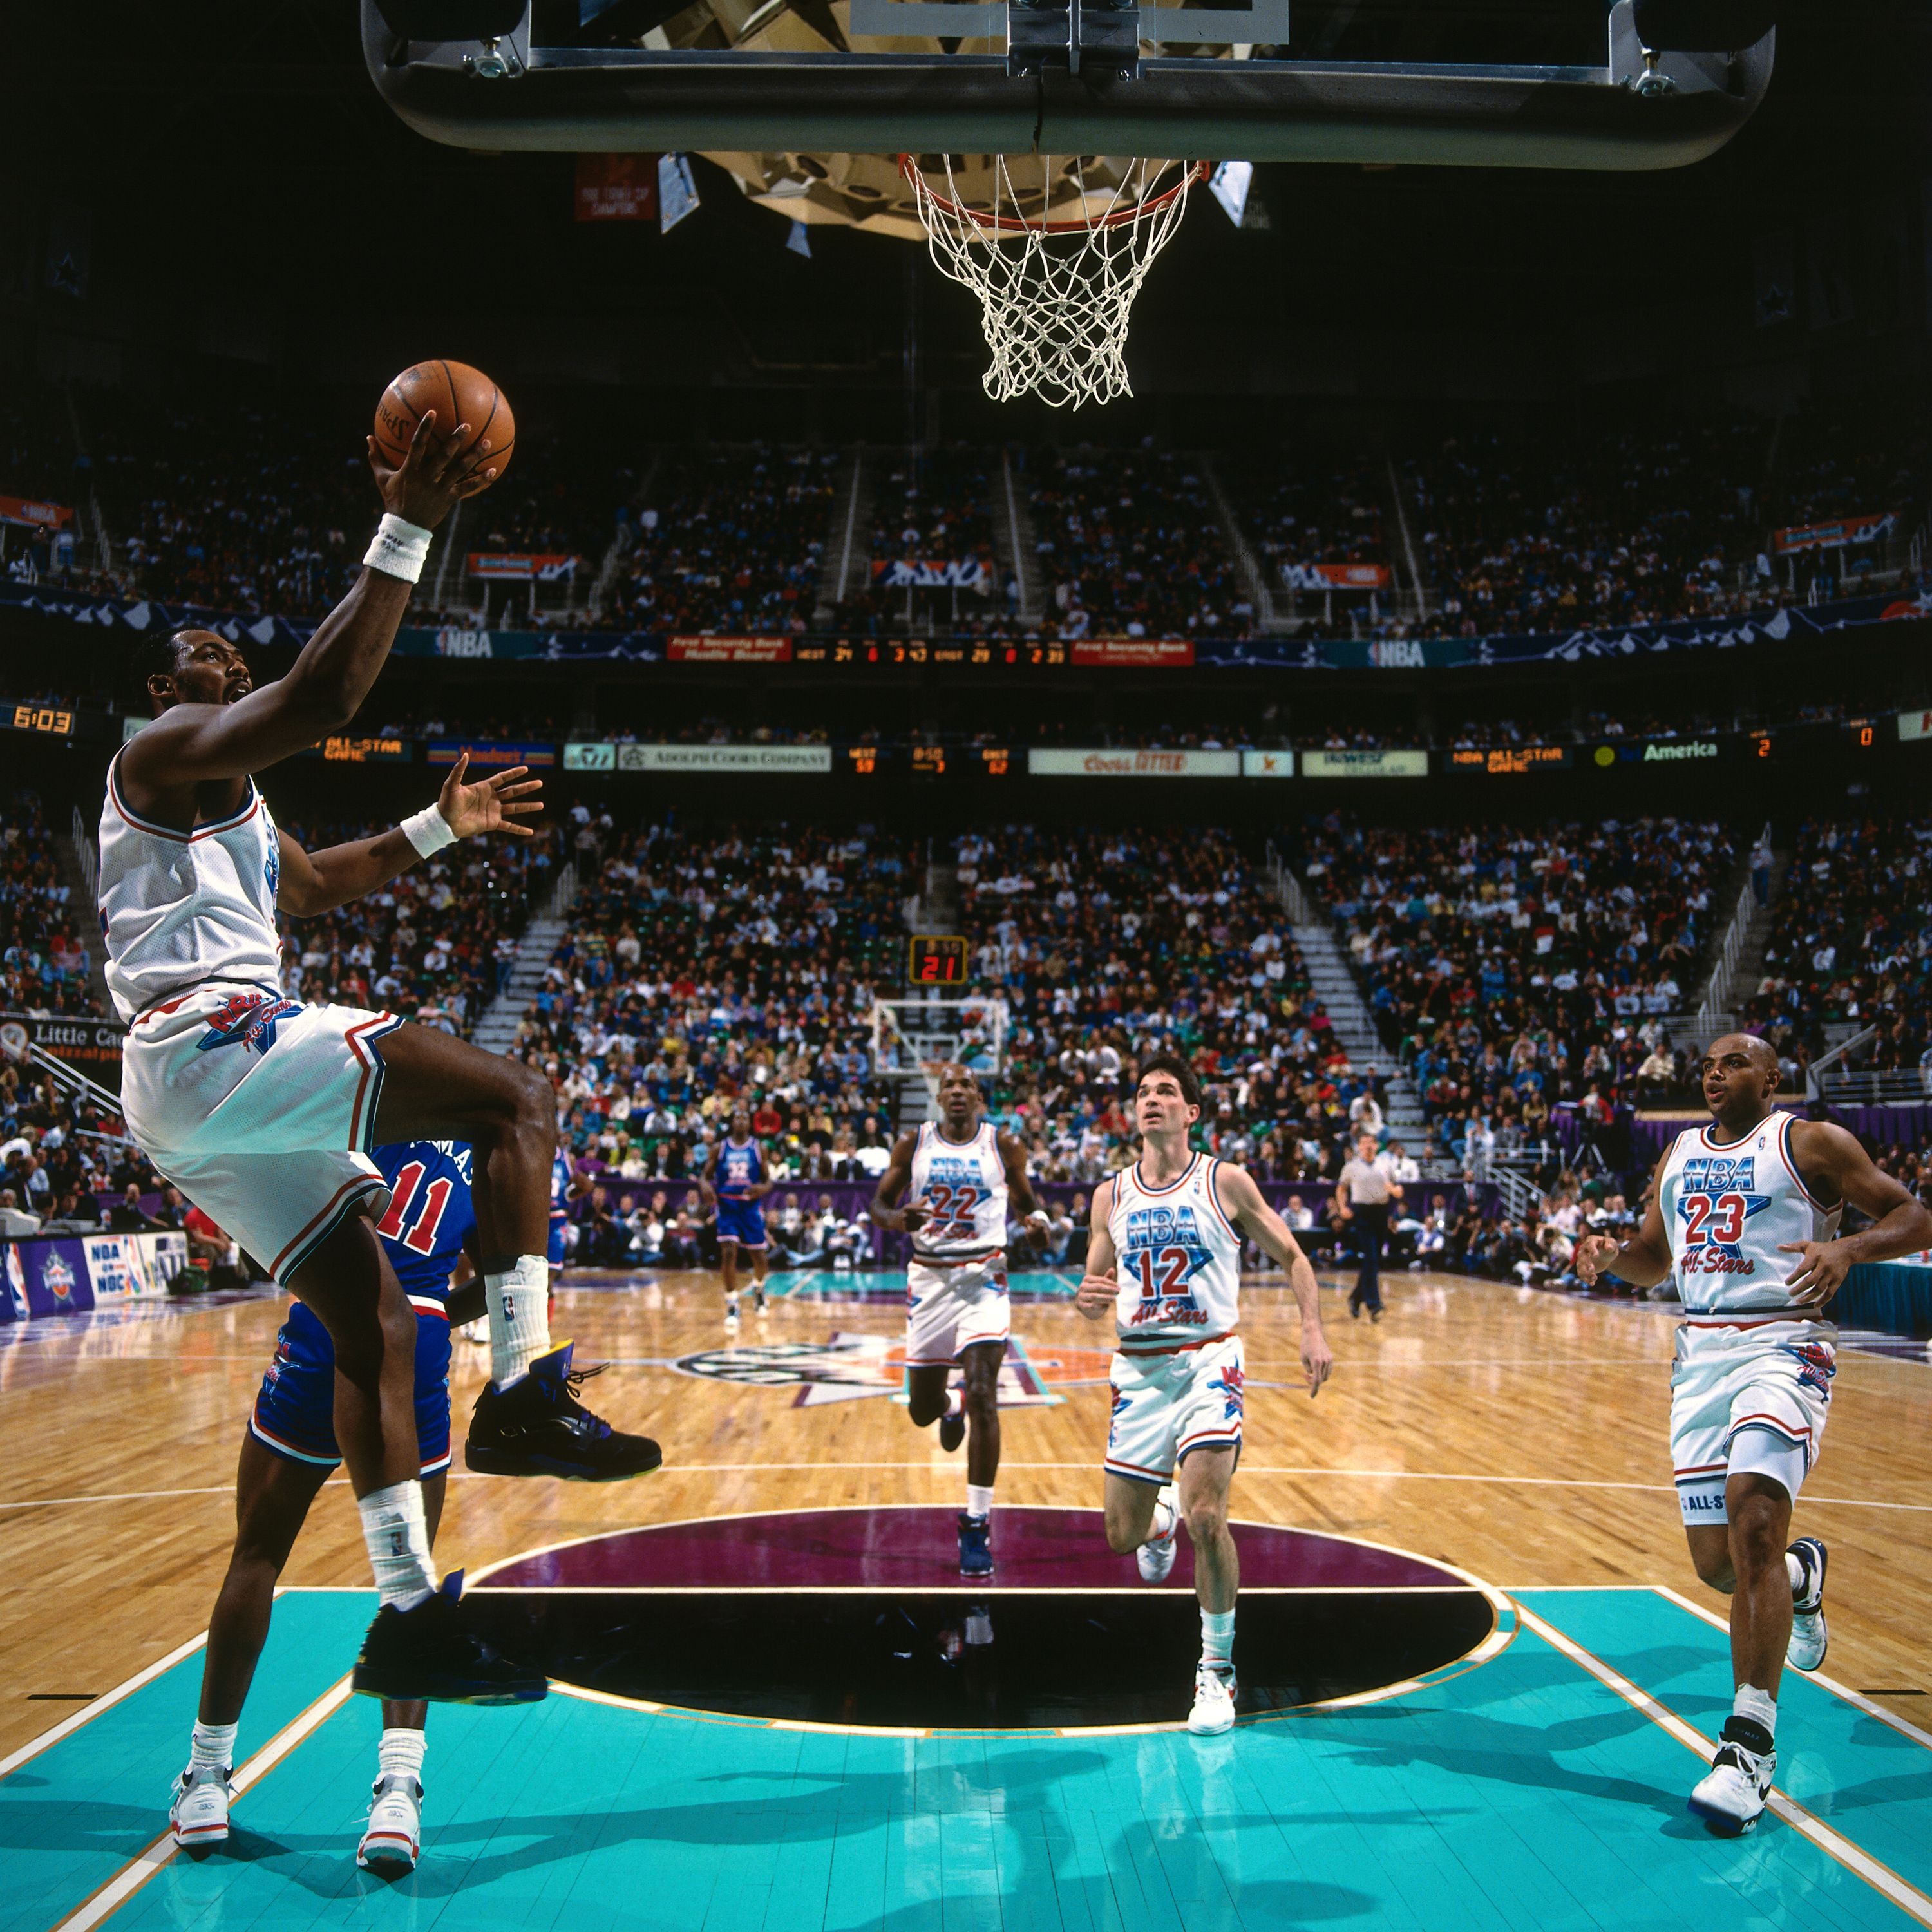 Karl Malone shoots during the 1993 NBA All-Star Game on February 21, 1993 at the Delta Center in Salt Lake City. Photo by Nathaniel S. Butler/NBAE via Getty Images